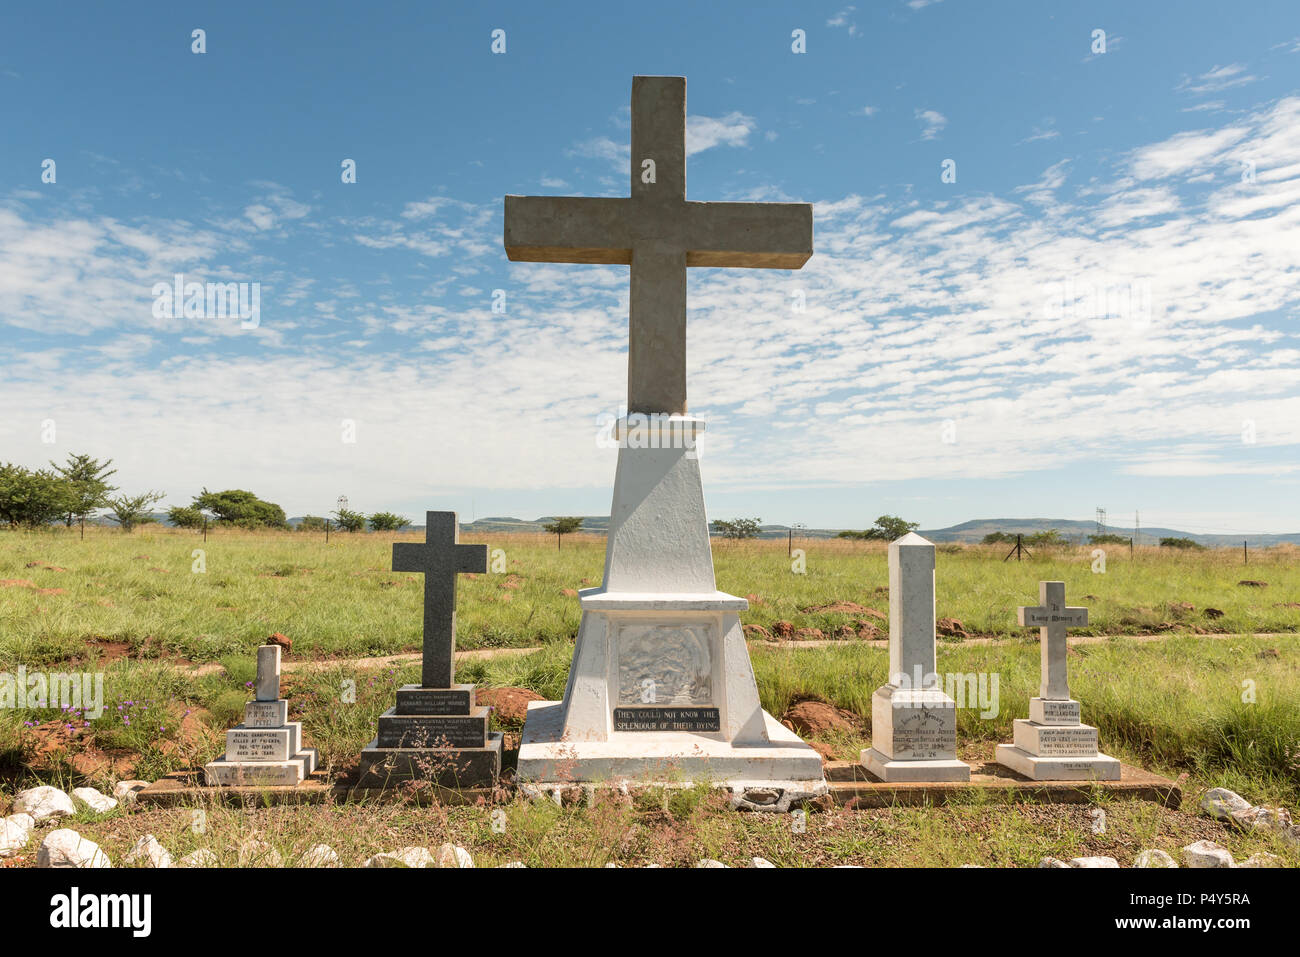 COLENSO, SOUTH AFRICA - MARCH 21, 2018: A monument at the Clouston Garden of Rememberance for soldiers killed in the battle of Colenso during the Angl Stock Photo